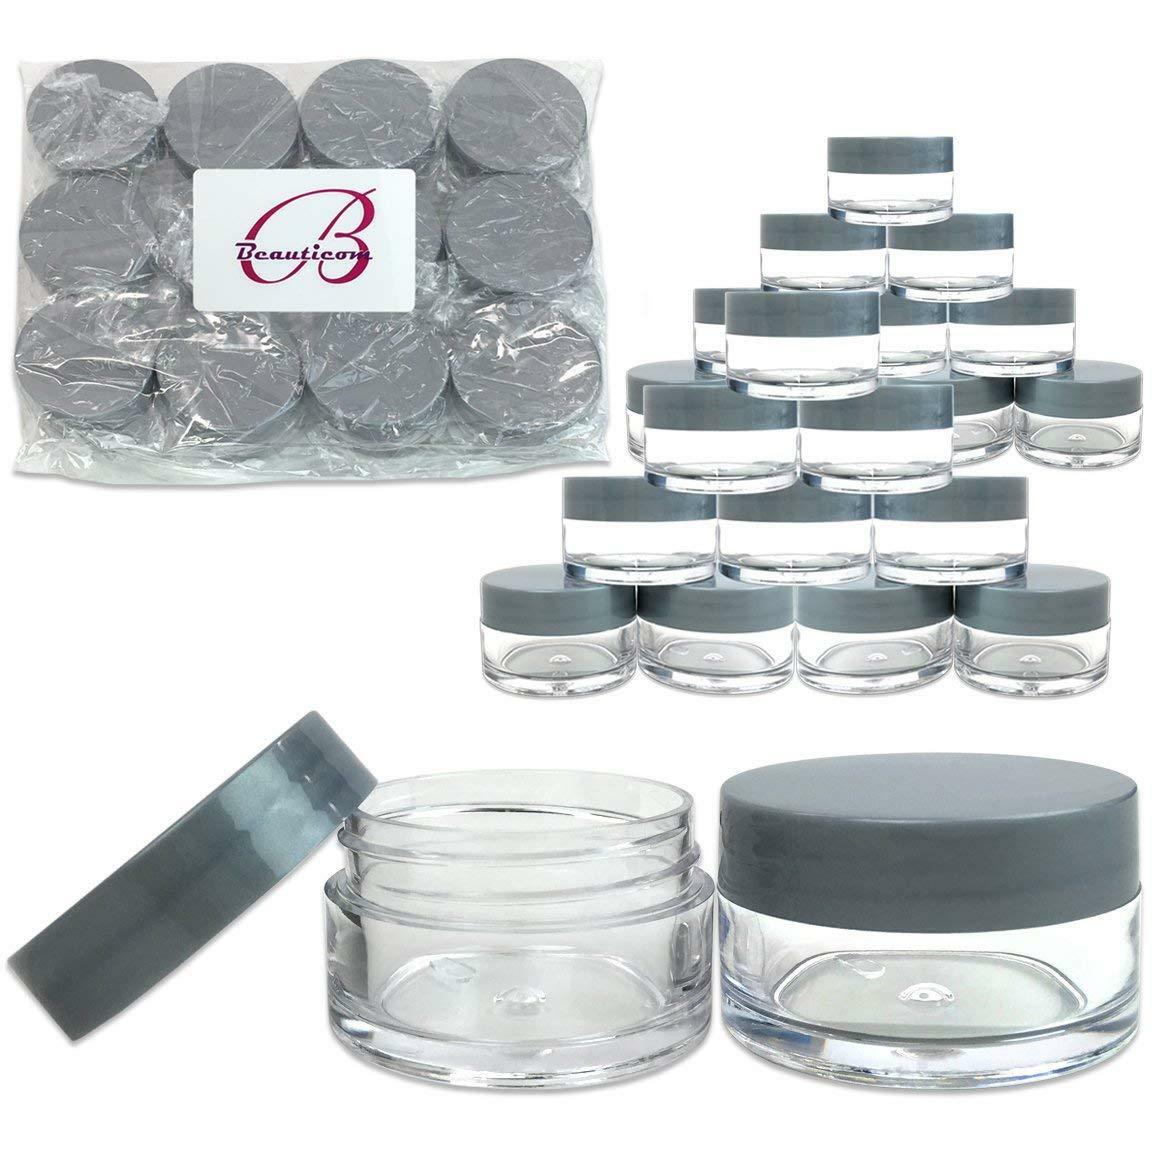 24 Pieces 20g/20ml Round Clear Cosmetic Cream Sample Jars Gray Lids Bpa Free